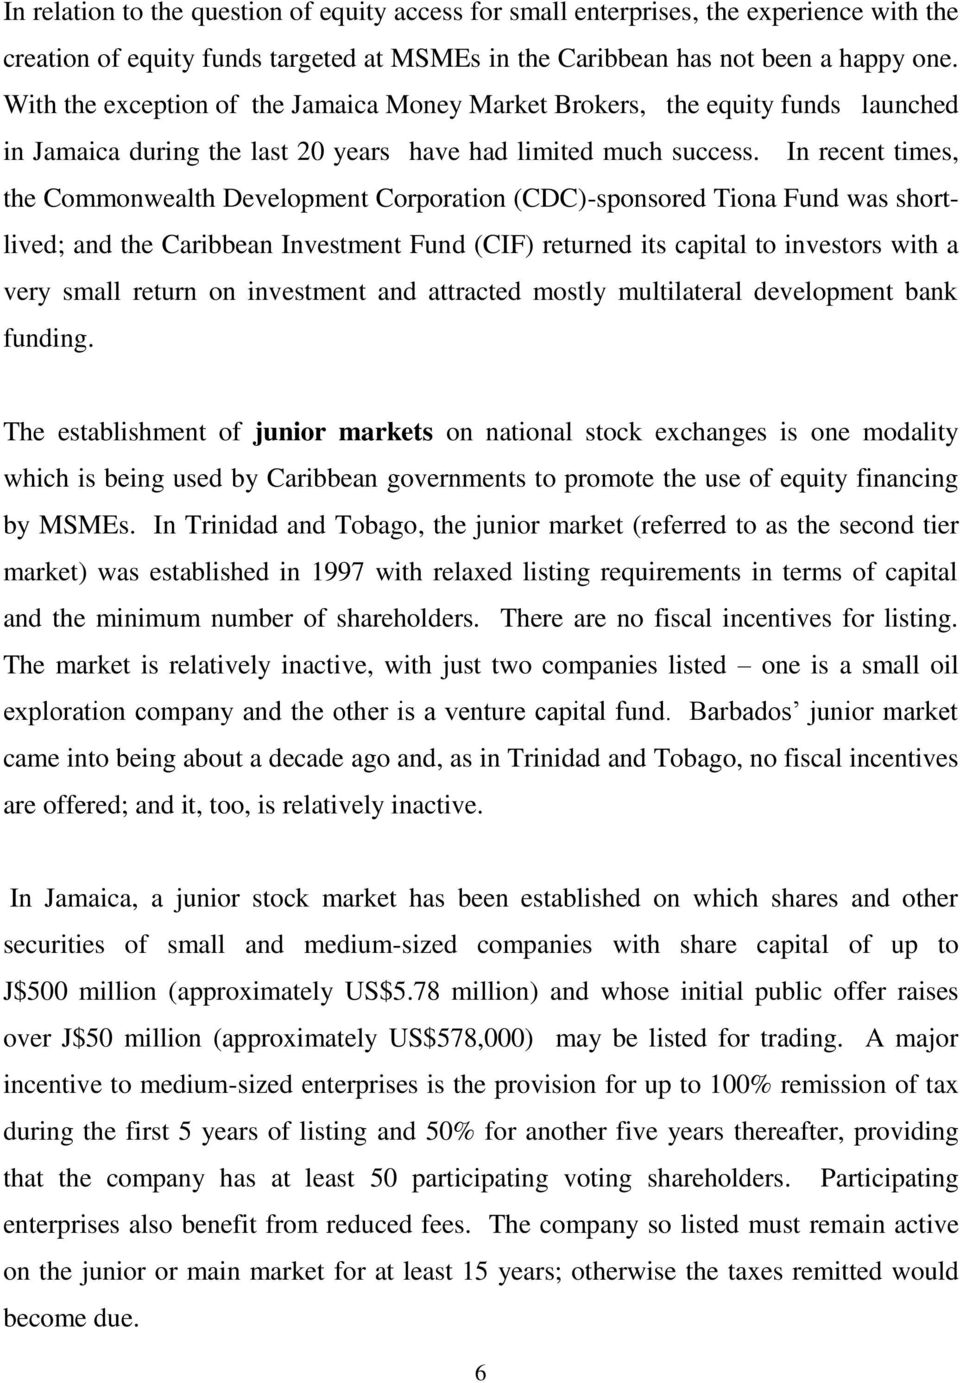 In recent times, the Commonwealth Development Corporation (CDC)-sponsored Tiona Fund was shortlived; and the Caribbean Investment Fund (CIF) returned its capital to investors with a very small return